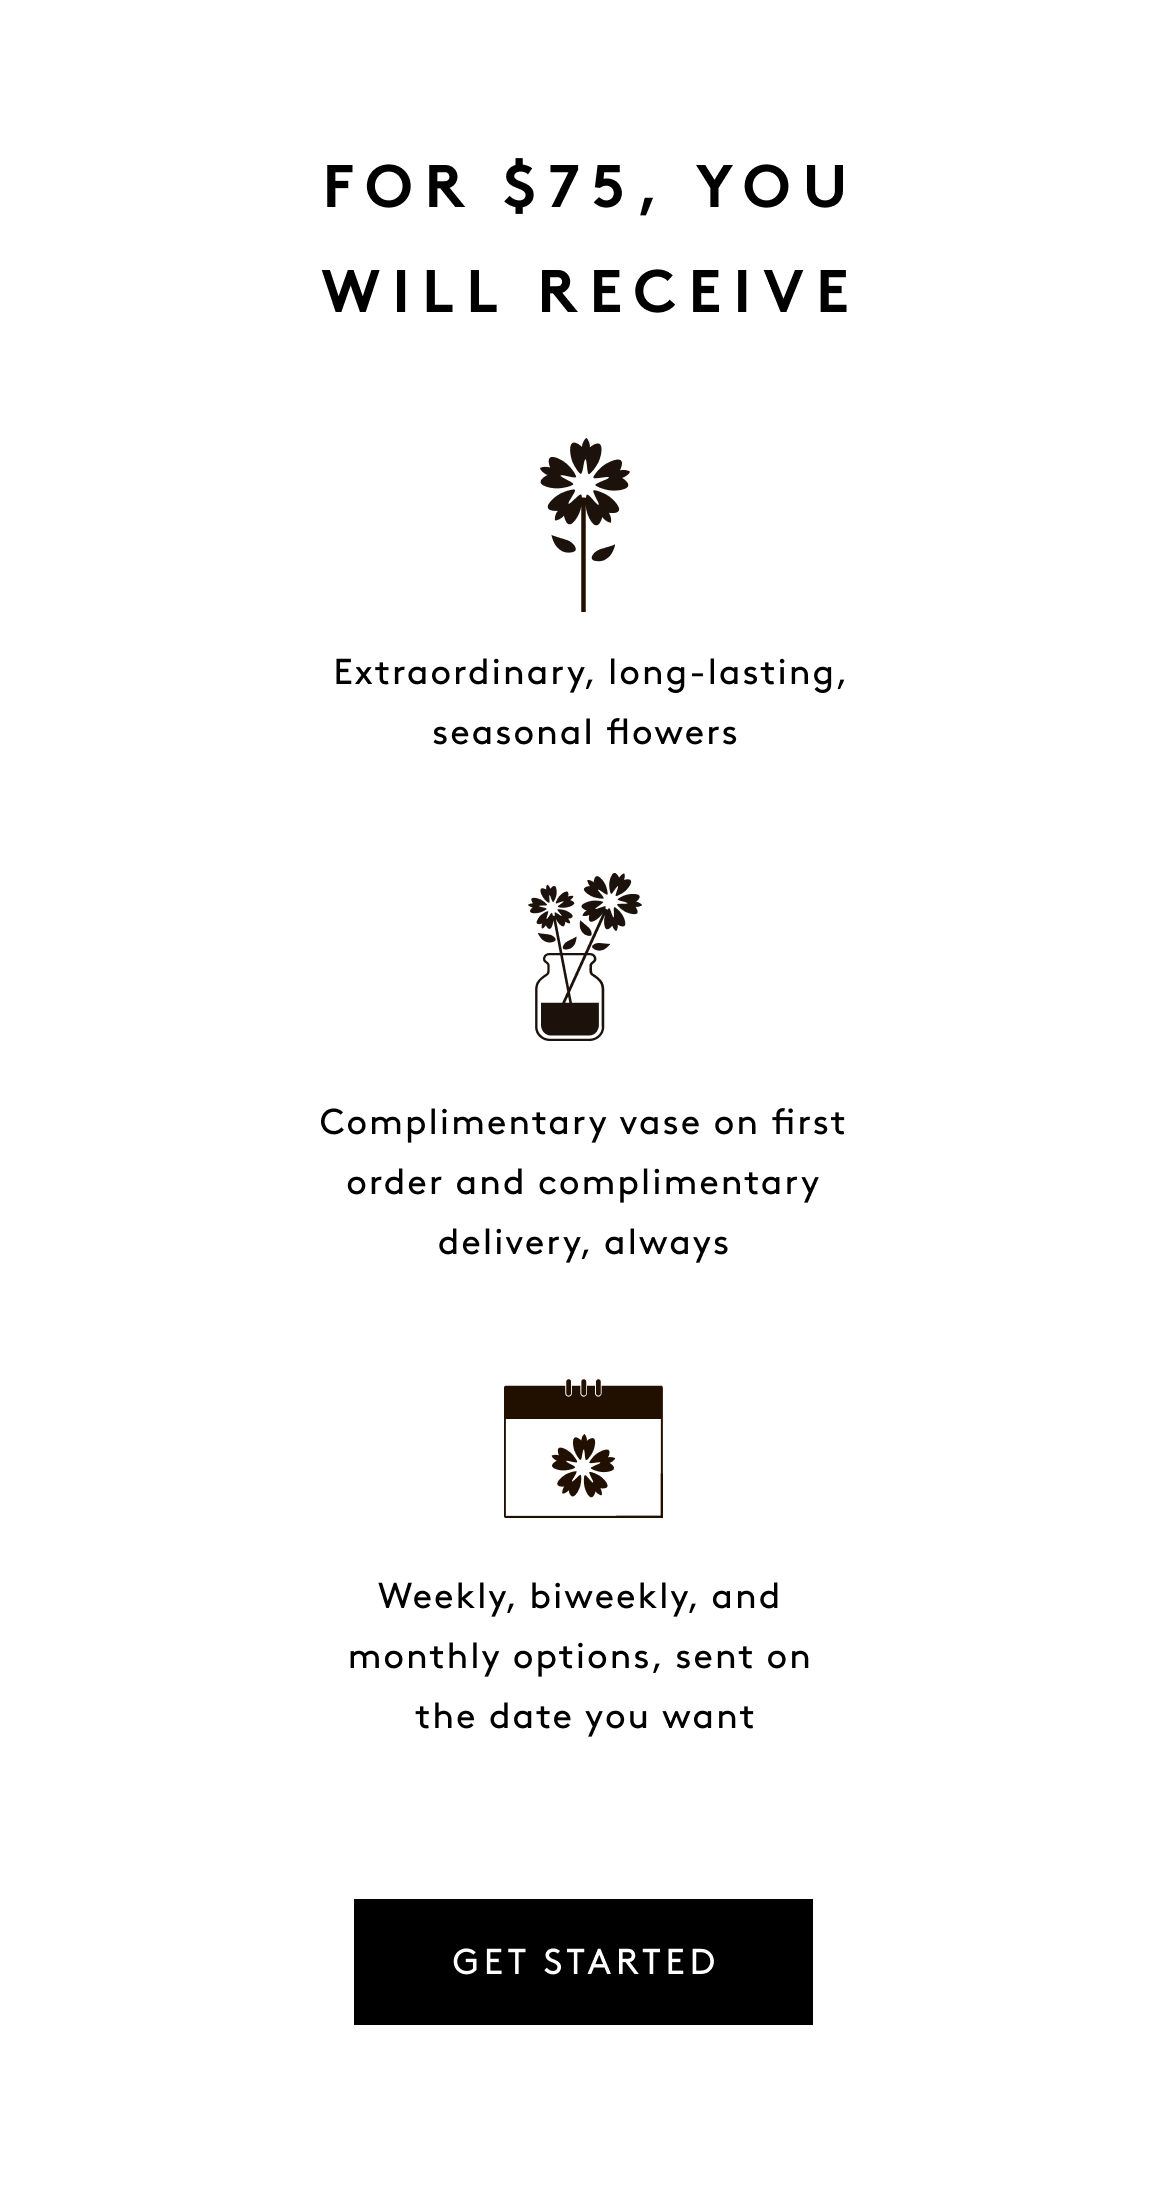 Get flowers weekly, monthly all year round